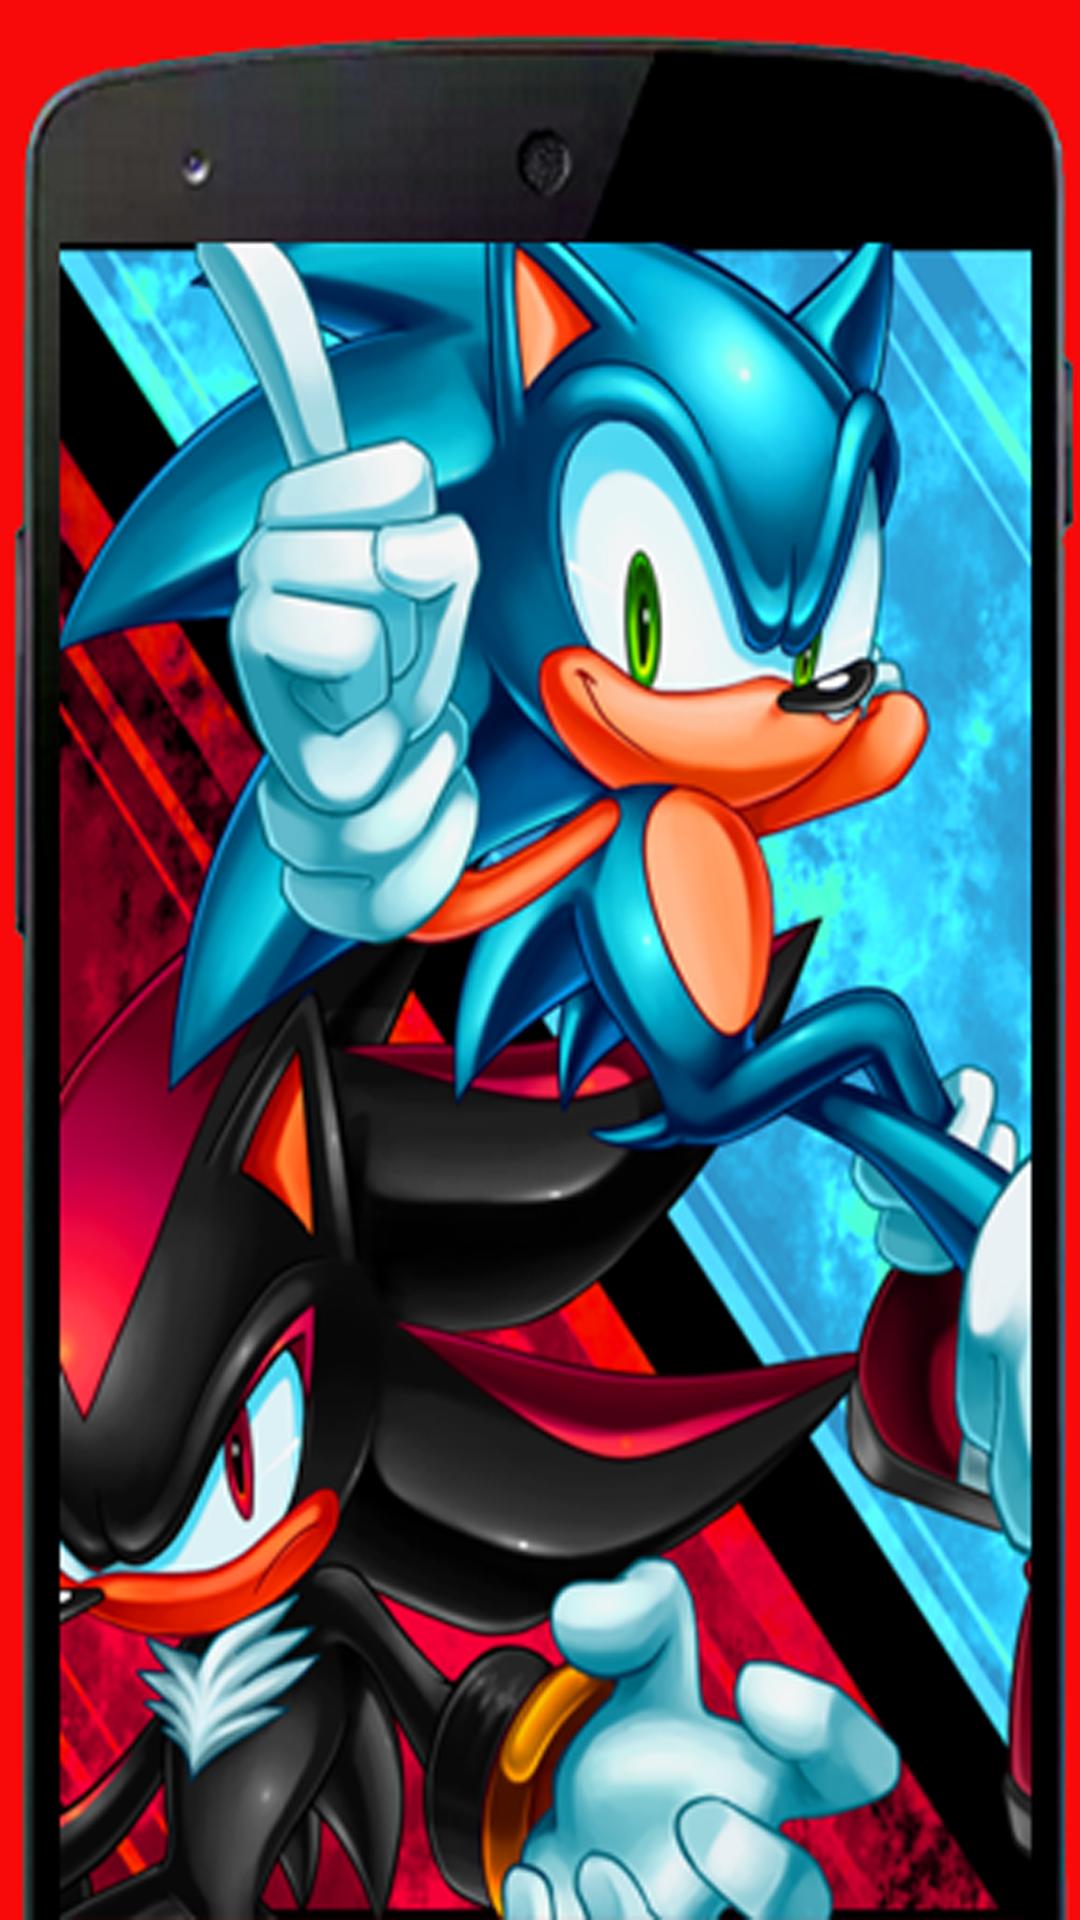 Hedgehog Sonic Wallpaper Hd For Android Apk Download